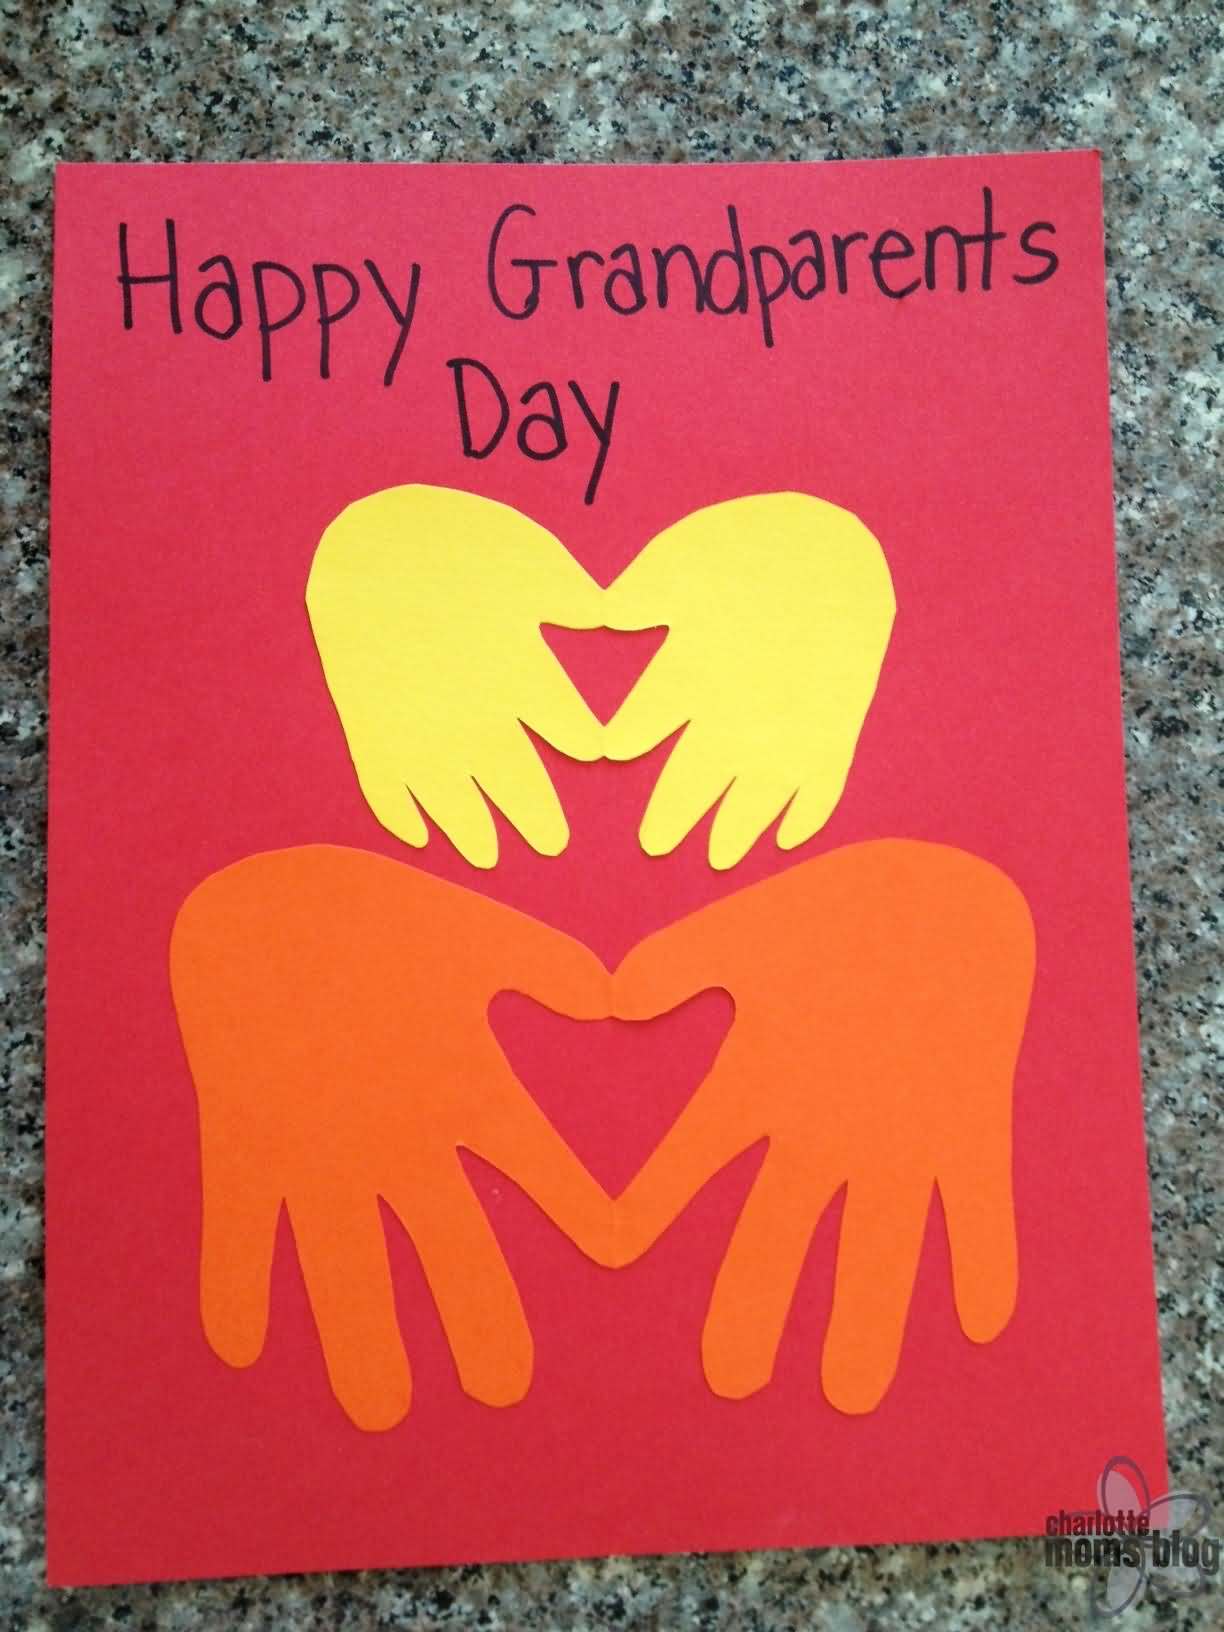 Happy Grandparents Day hands greeting card